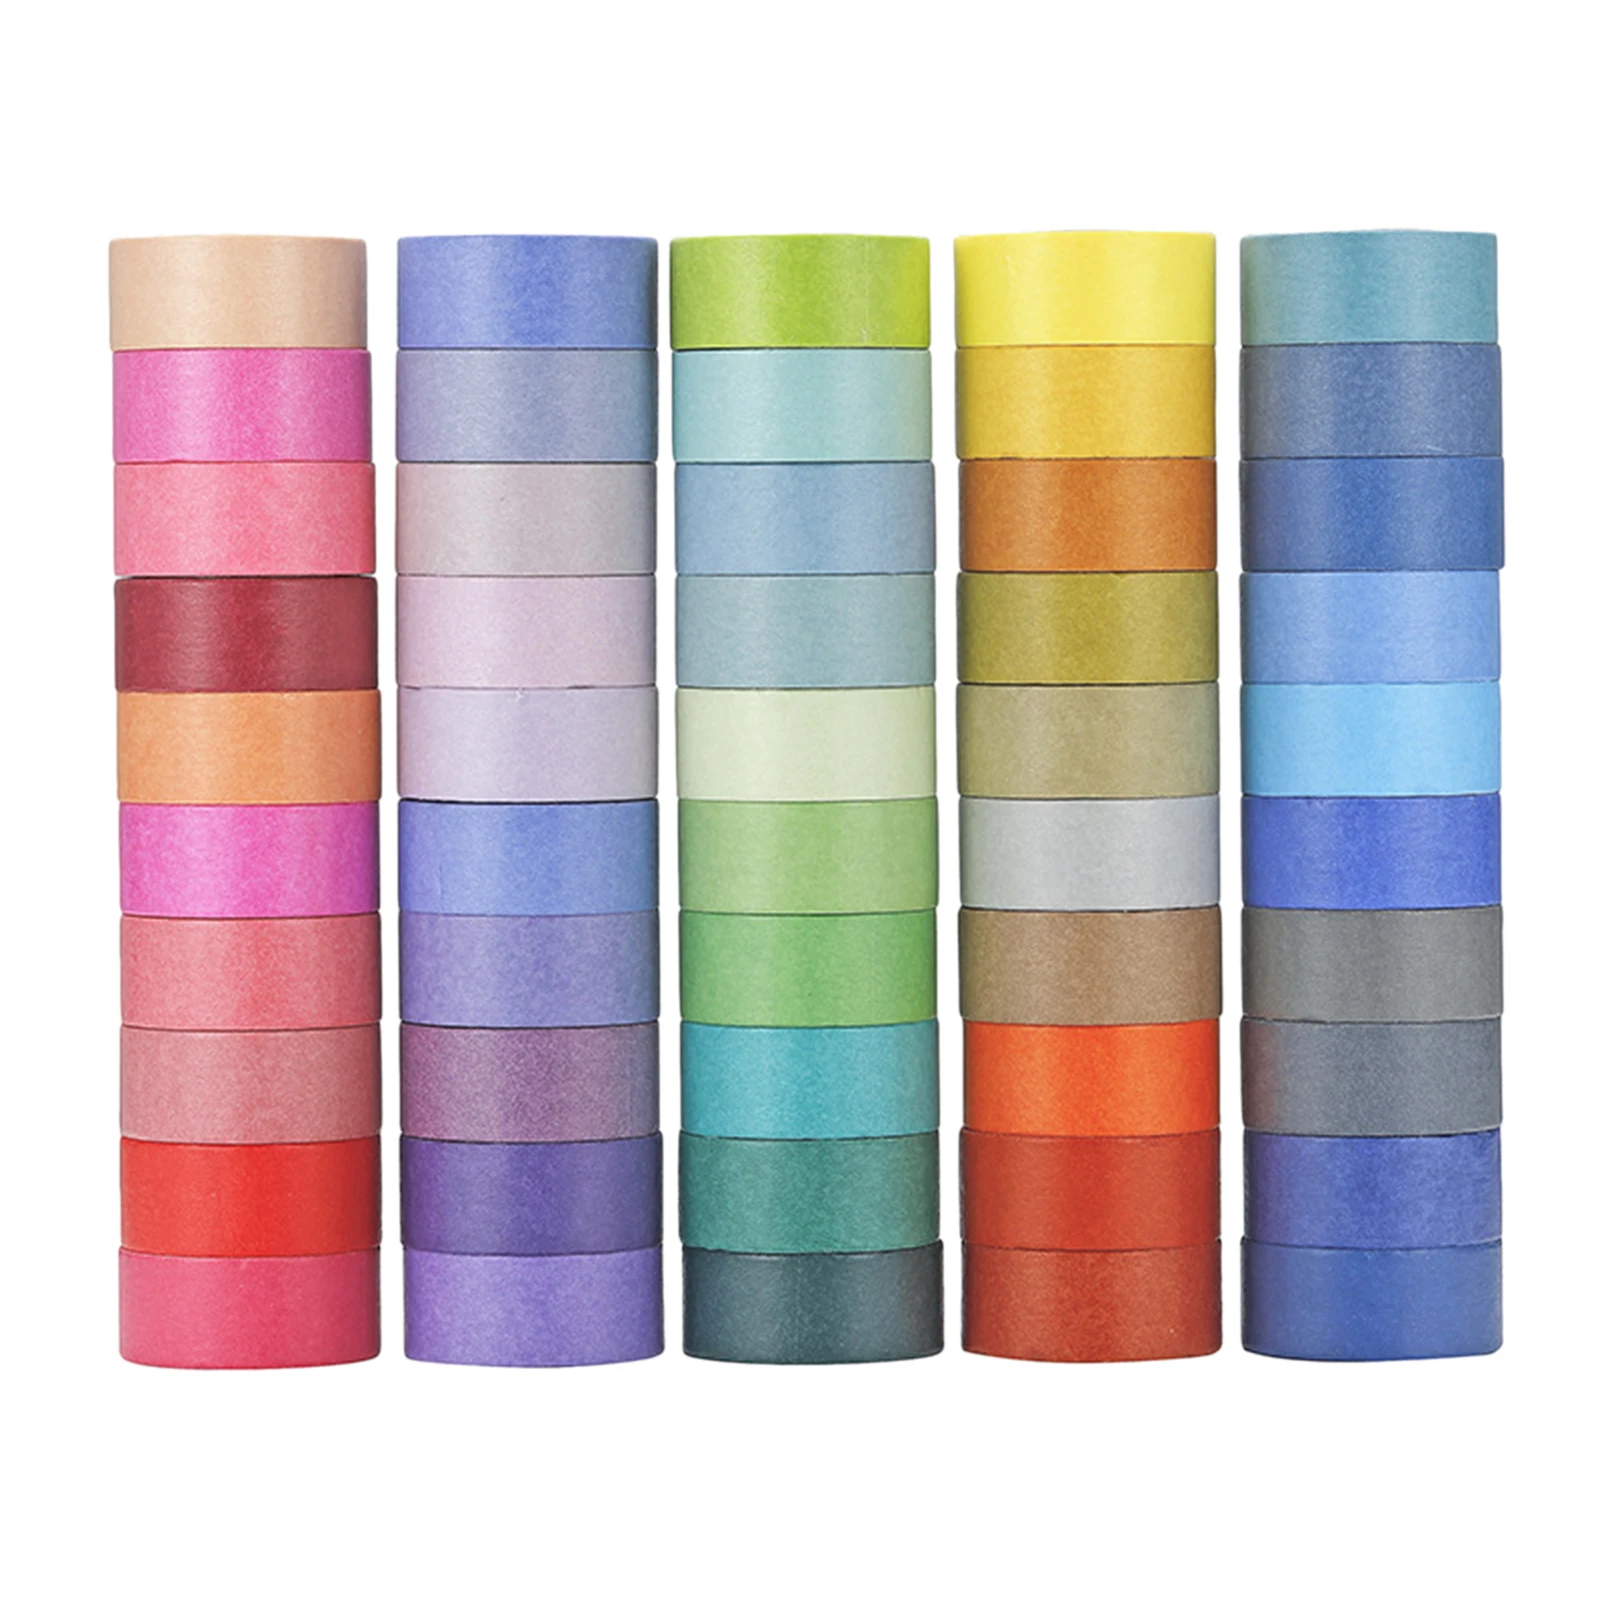 Tape 60 Pcs of 60 Colors 15mm Colored Masking Tape Rainbow Color Easy Tear Home Decoration Office School Supplies